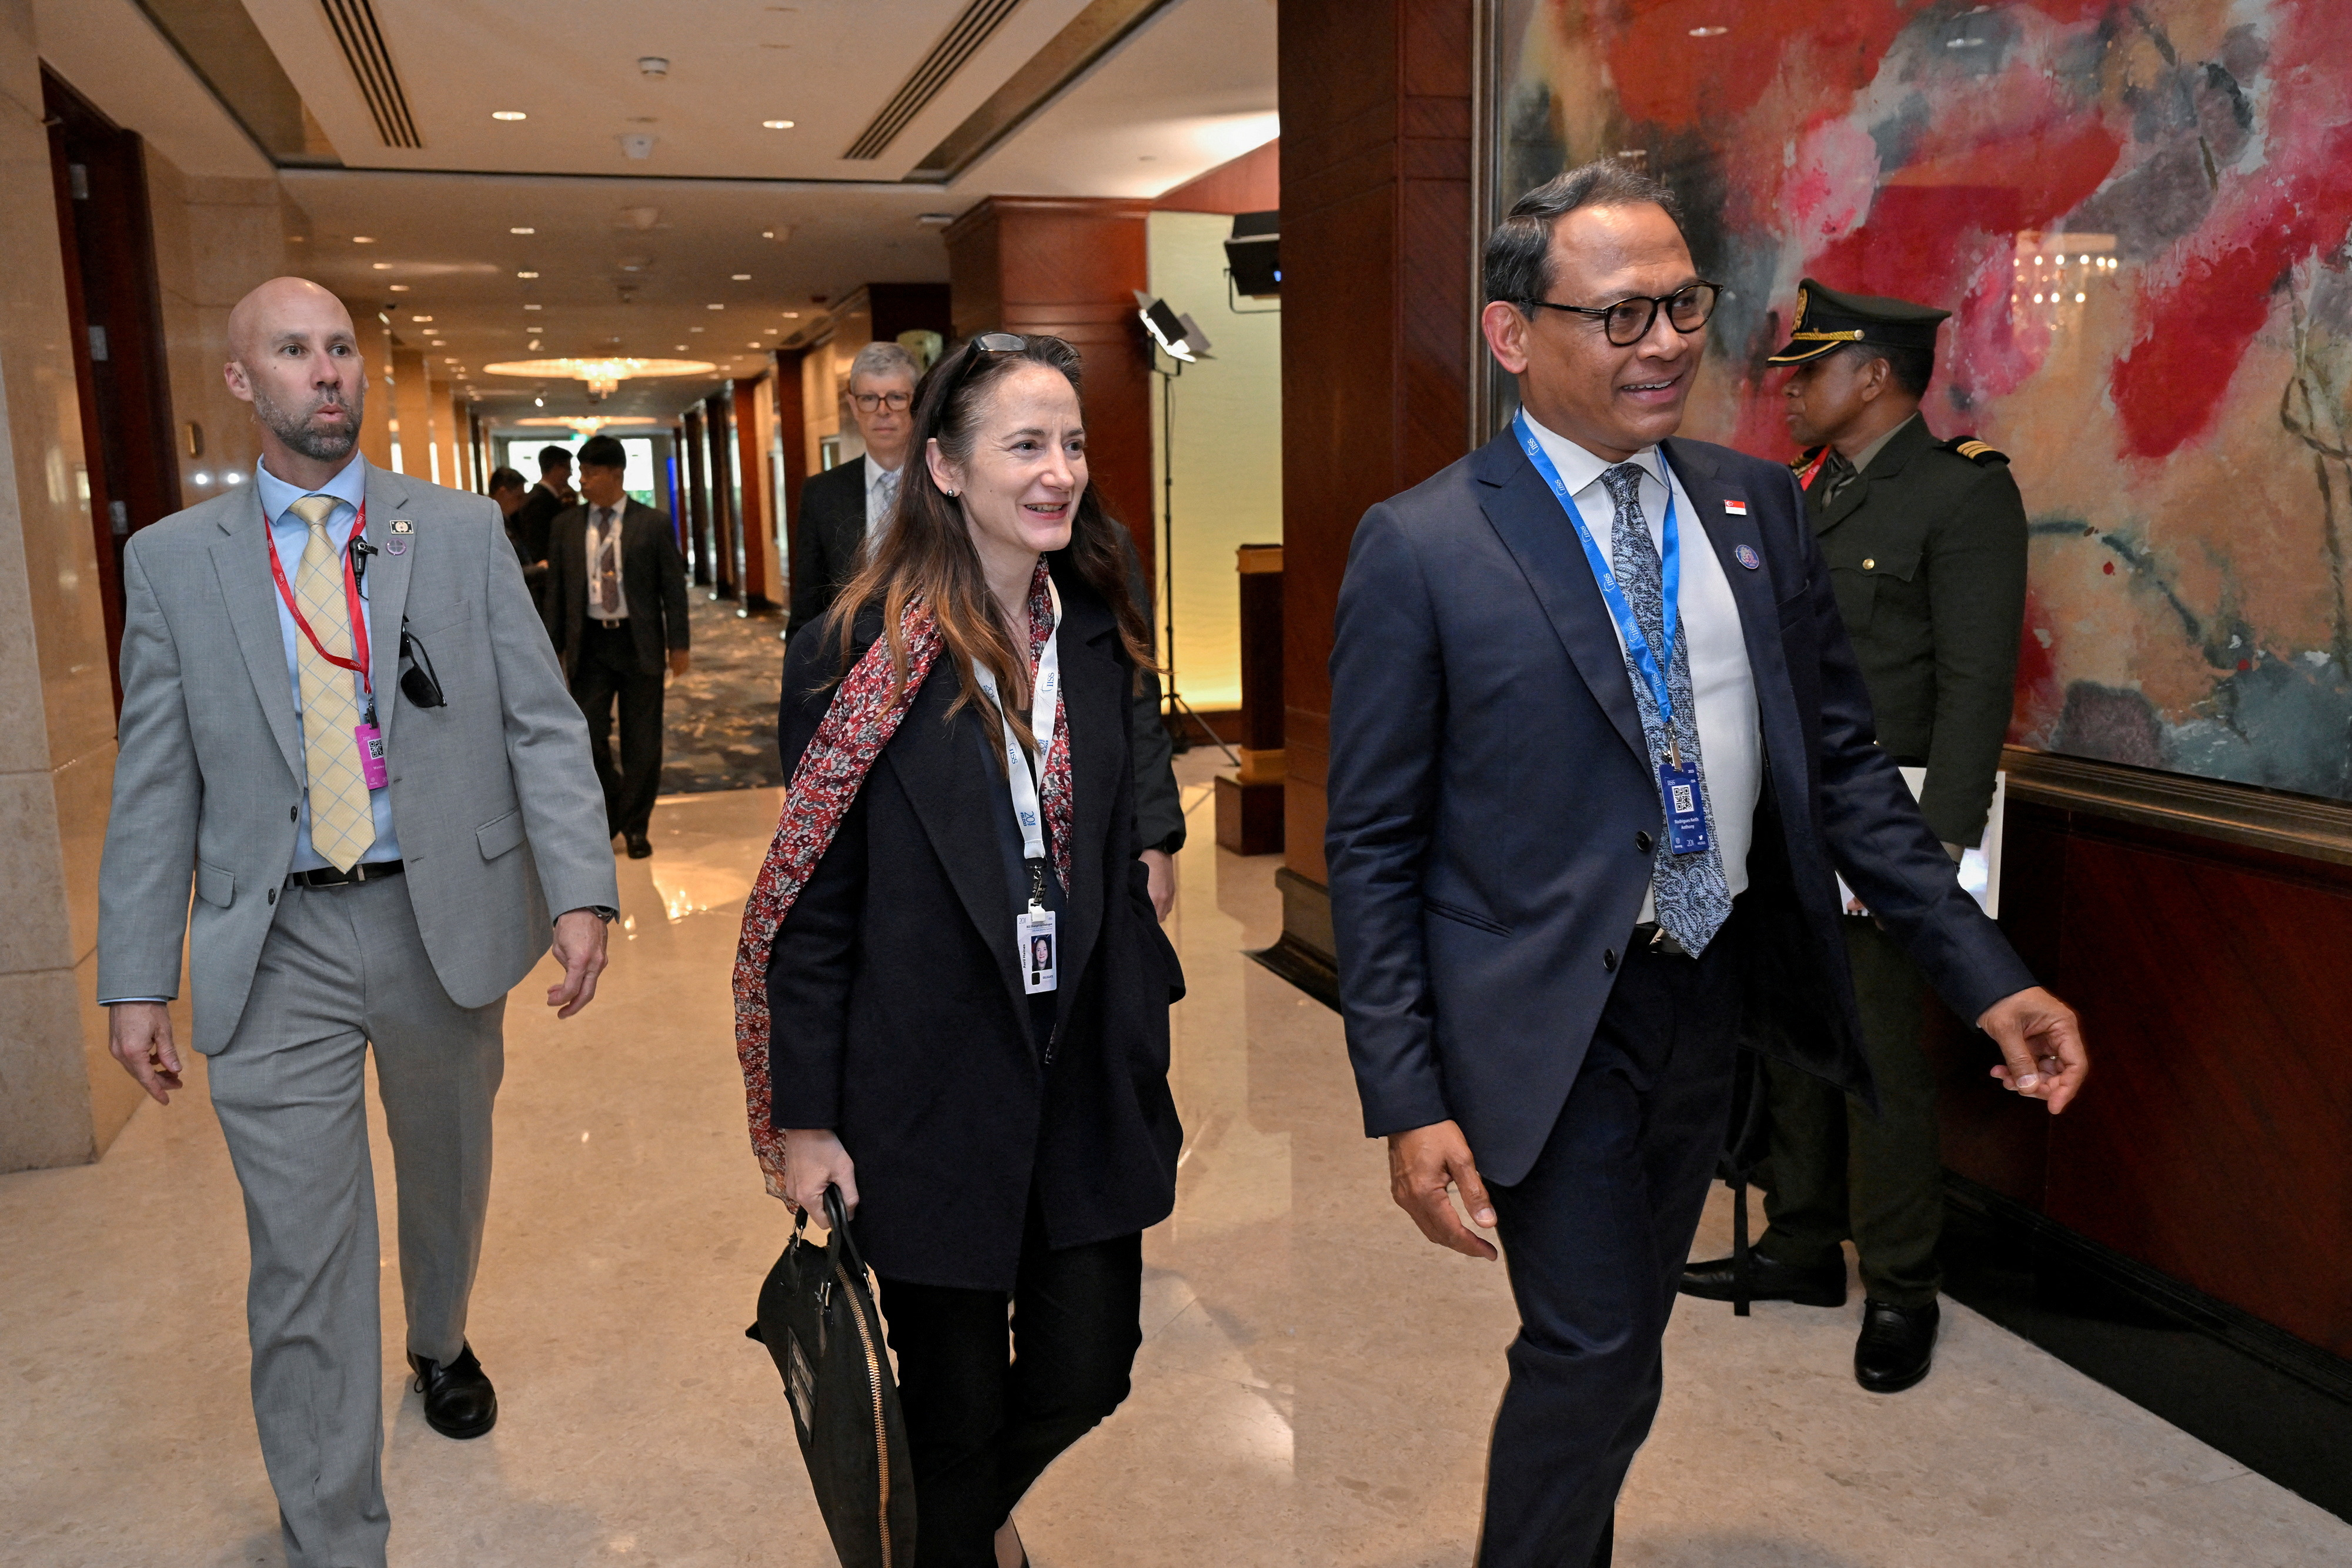 U.S. Director of National Intelligence Avril Haines attends the 20th IISS Shangri-La Dialogue in Singapore